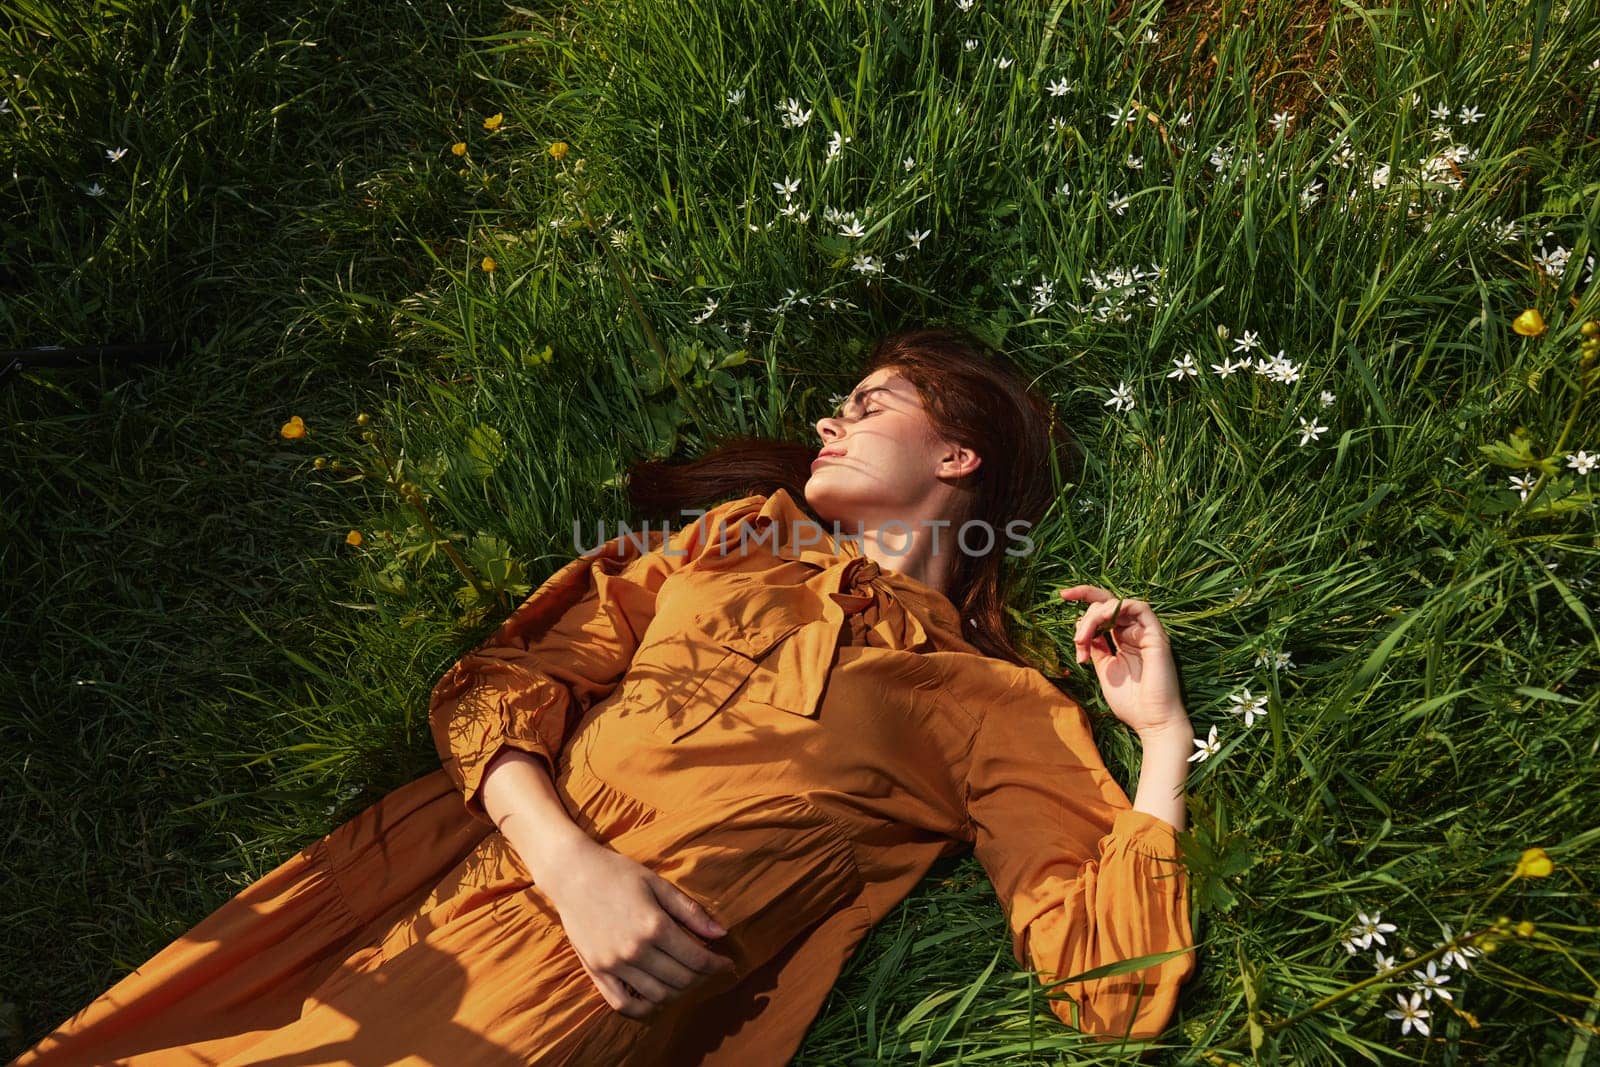 a calm woman with long red hair lies in a green field with yellow flowers, in an orange dress with her eyes closed, with a pleasant smile on her face, enjoying peace, illuminated by the setting sun by Vichizh